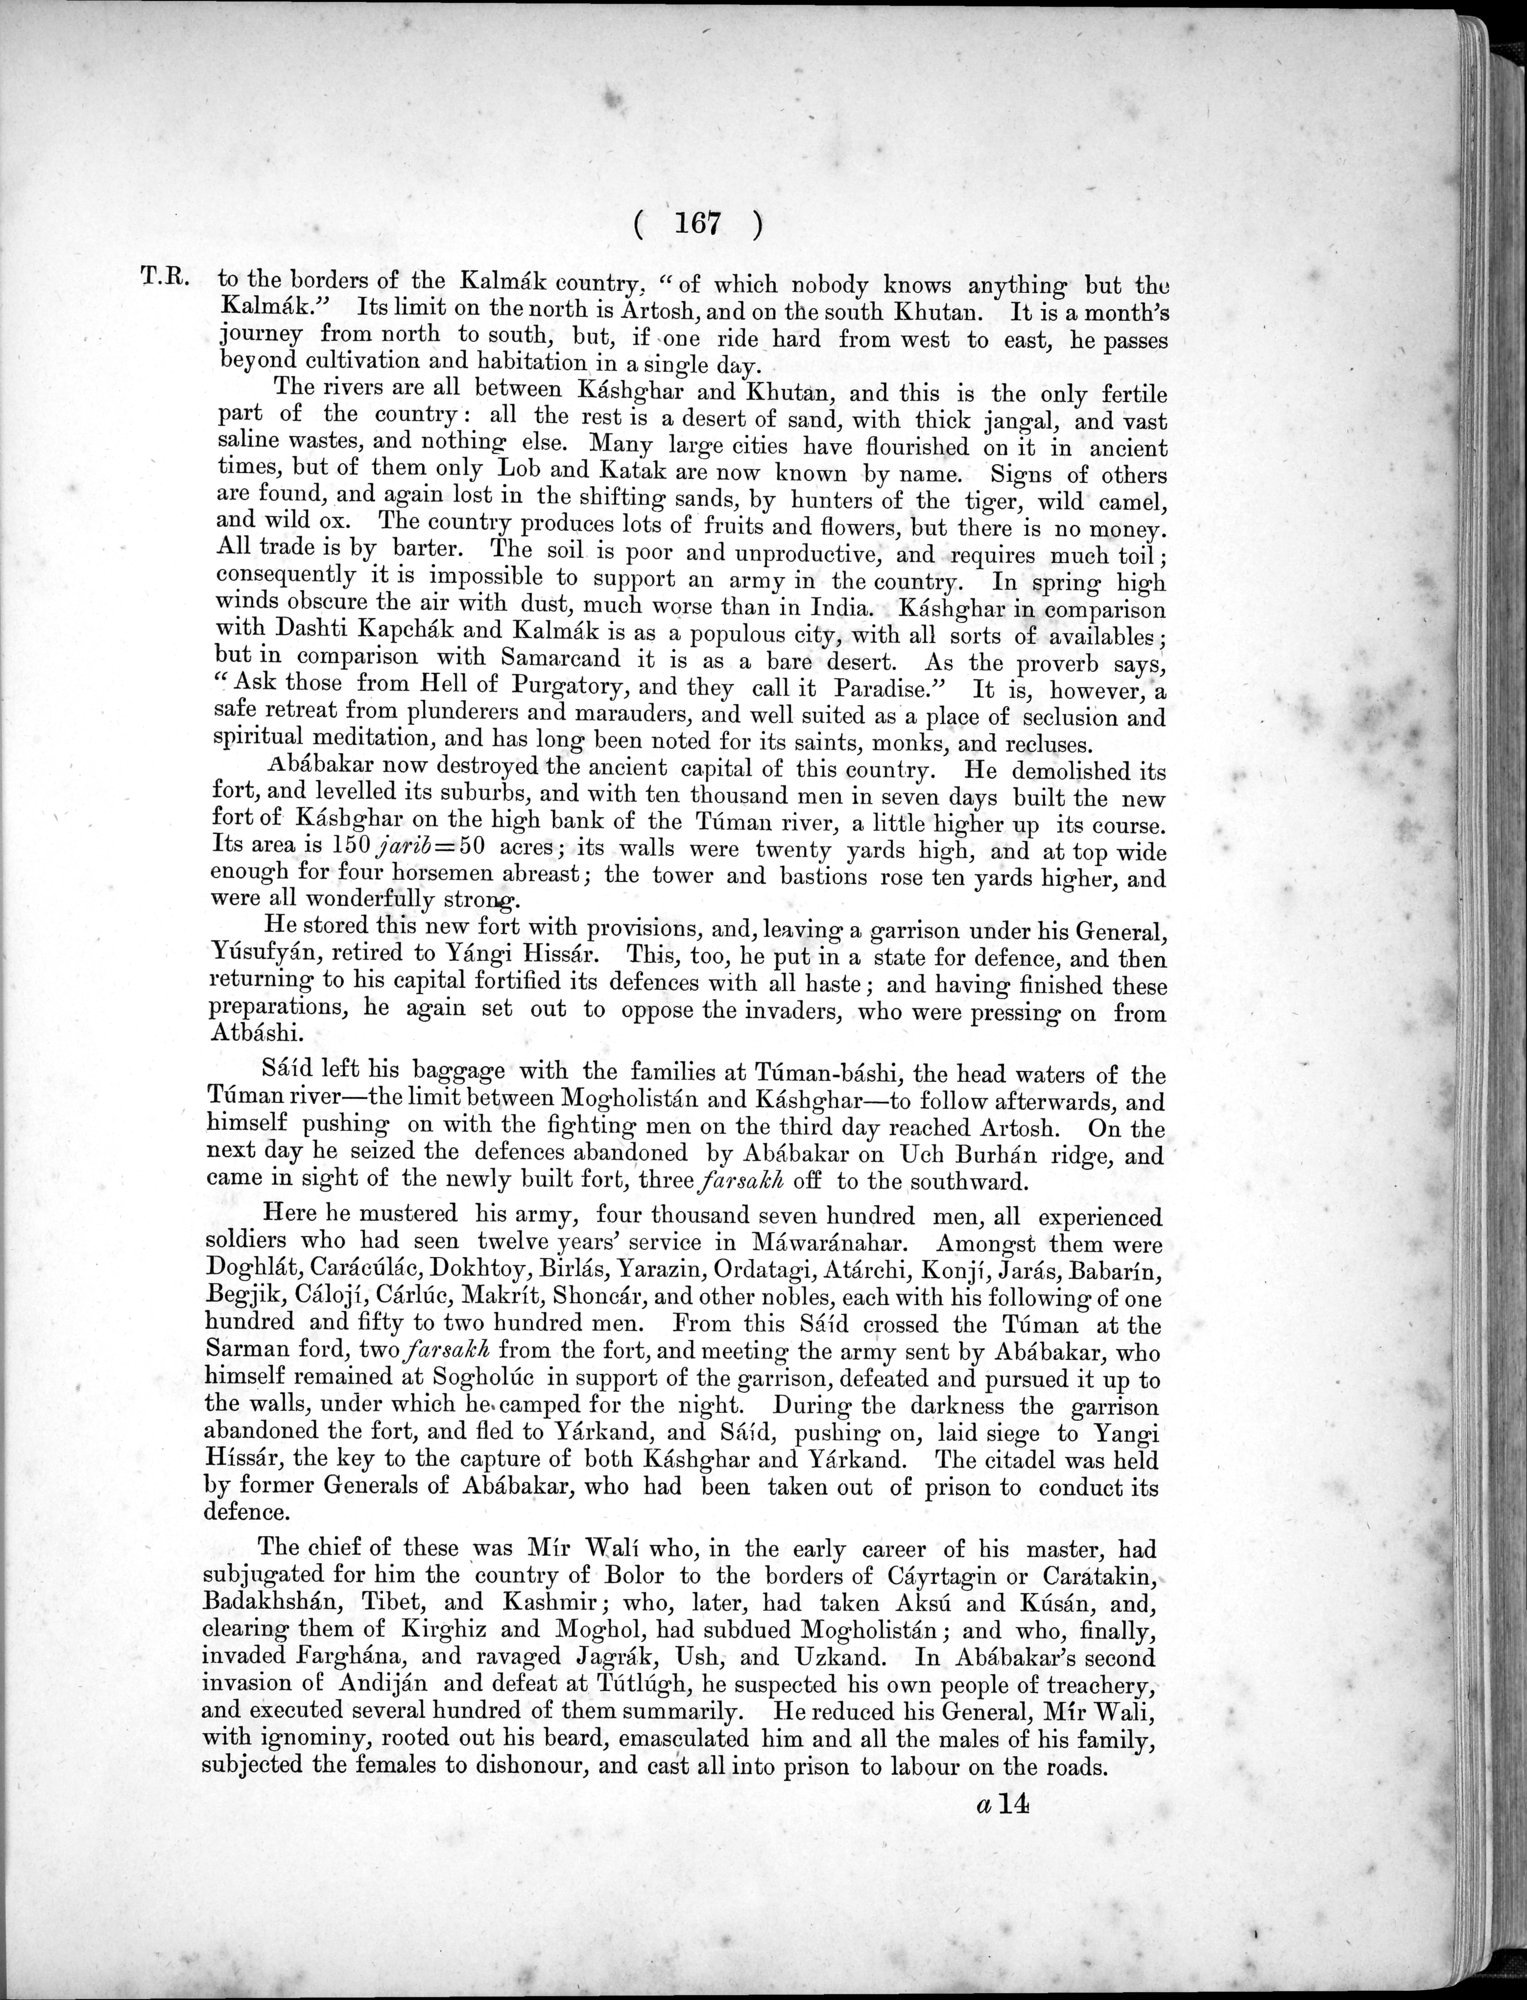 Report of a Mission to Yarkund in 1873 : vol.1 / Page 245 (Grayscale High Resolution Image)